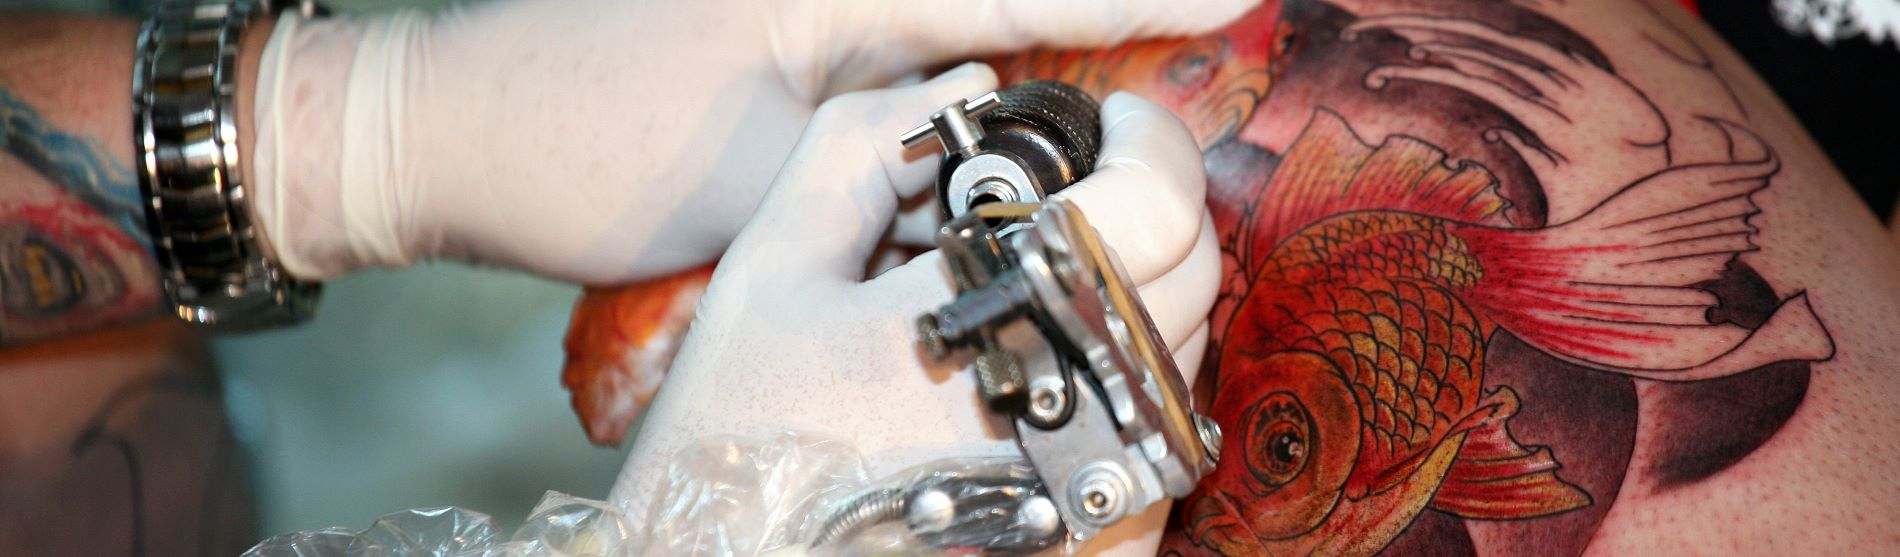 Will Laser Tattoo Removal Damage My Skin?